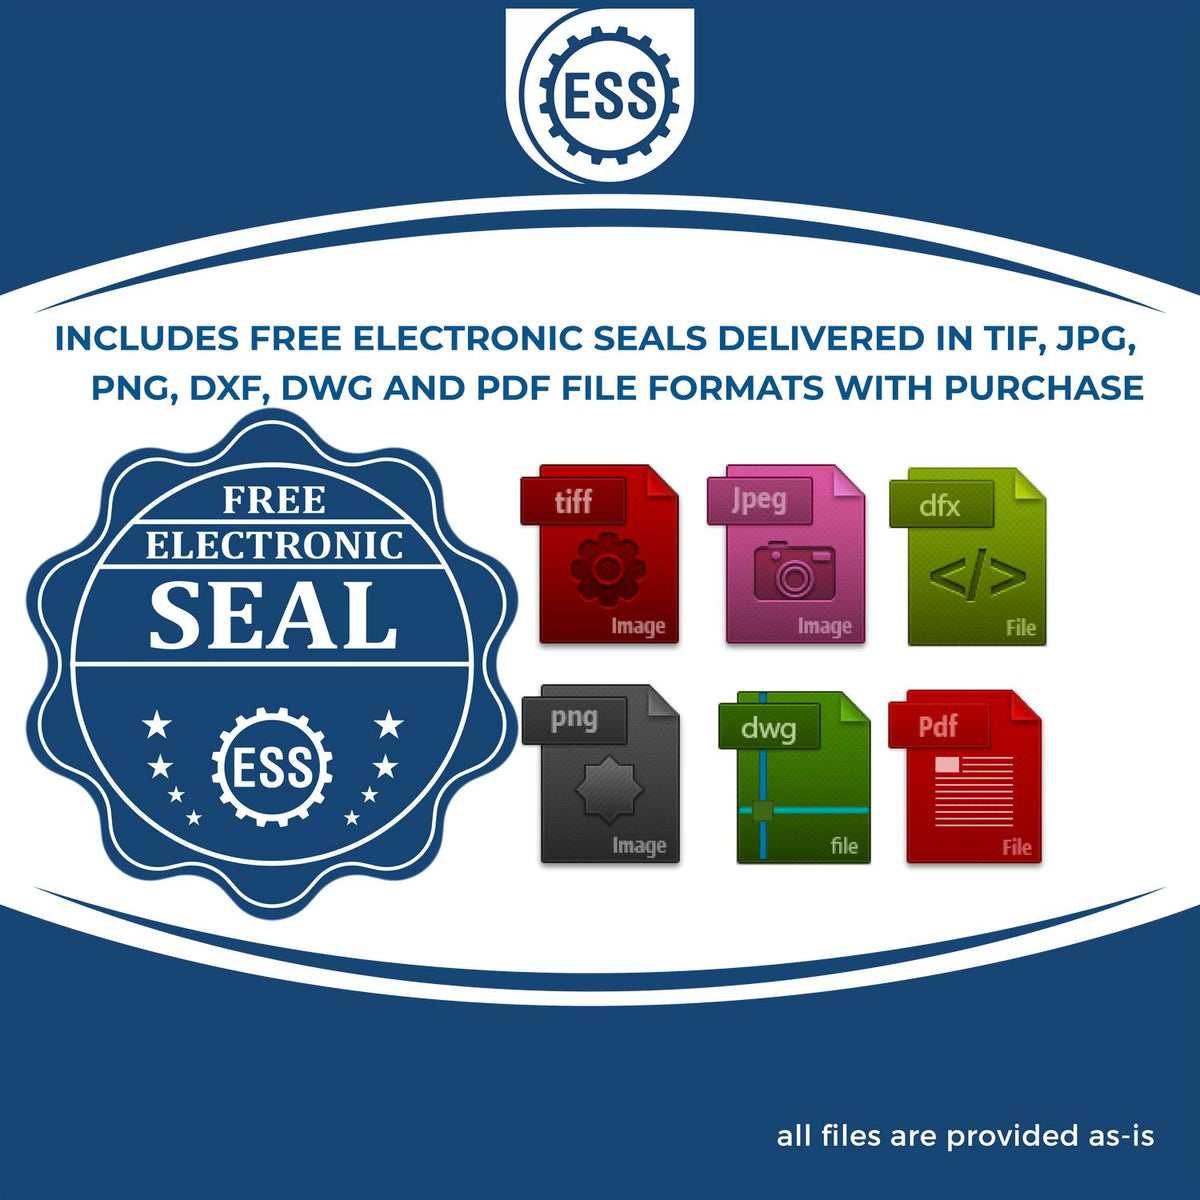 An infographic for the free electronic seal for the Slim Pre-Inked Missouri Land Surveyor Seal Stamp illustrating the different file type icons such as DXF, DWG, TIF, JPG and PNG.